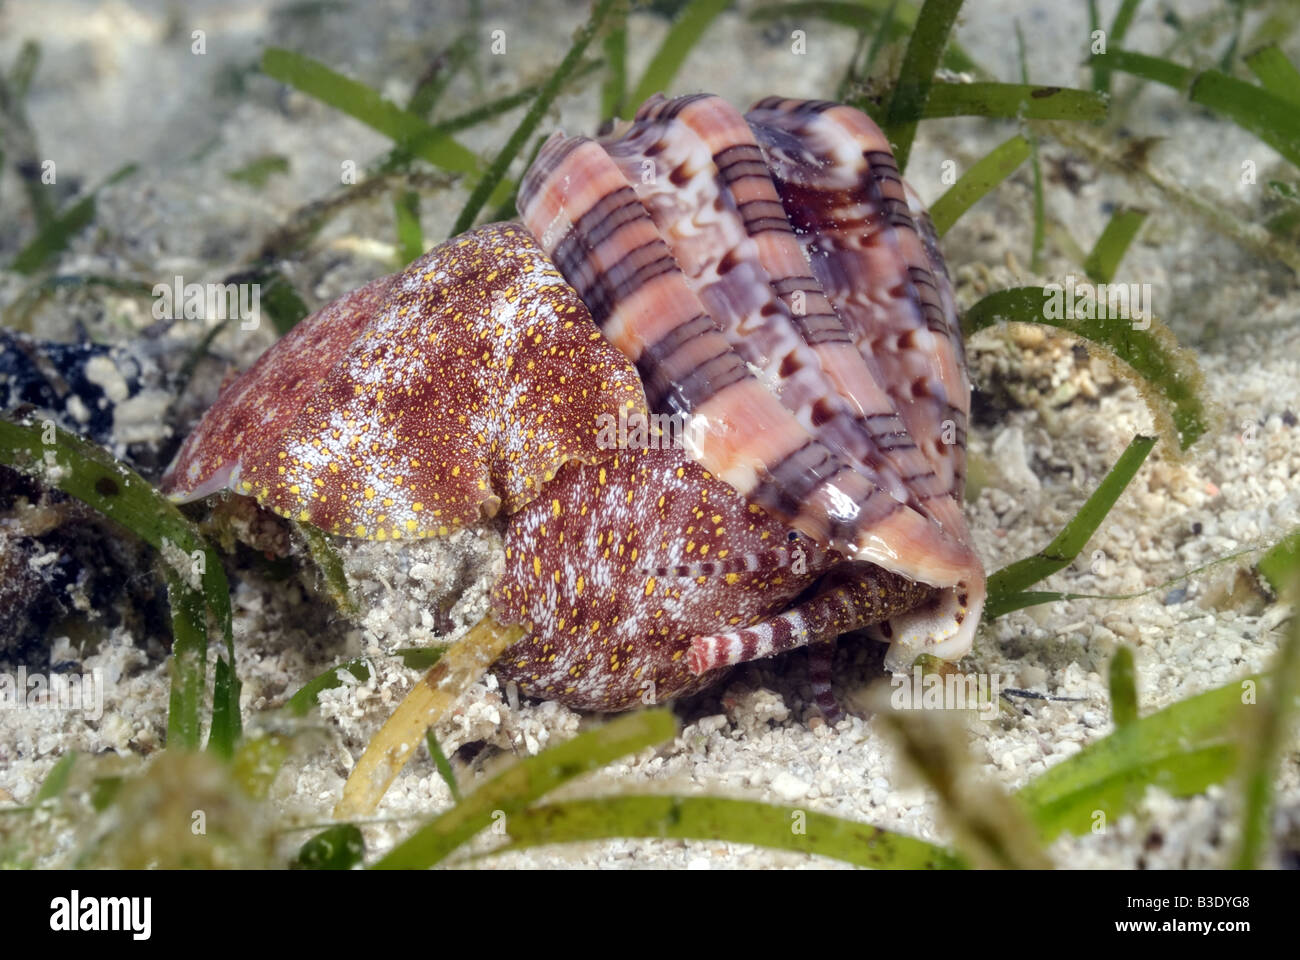 Harp snail shell catching prey among the sea grass in shallow water Stock Photo